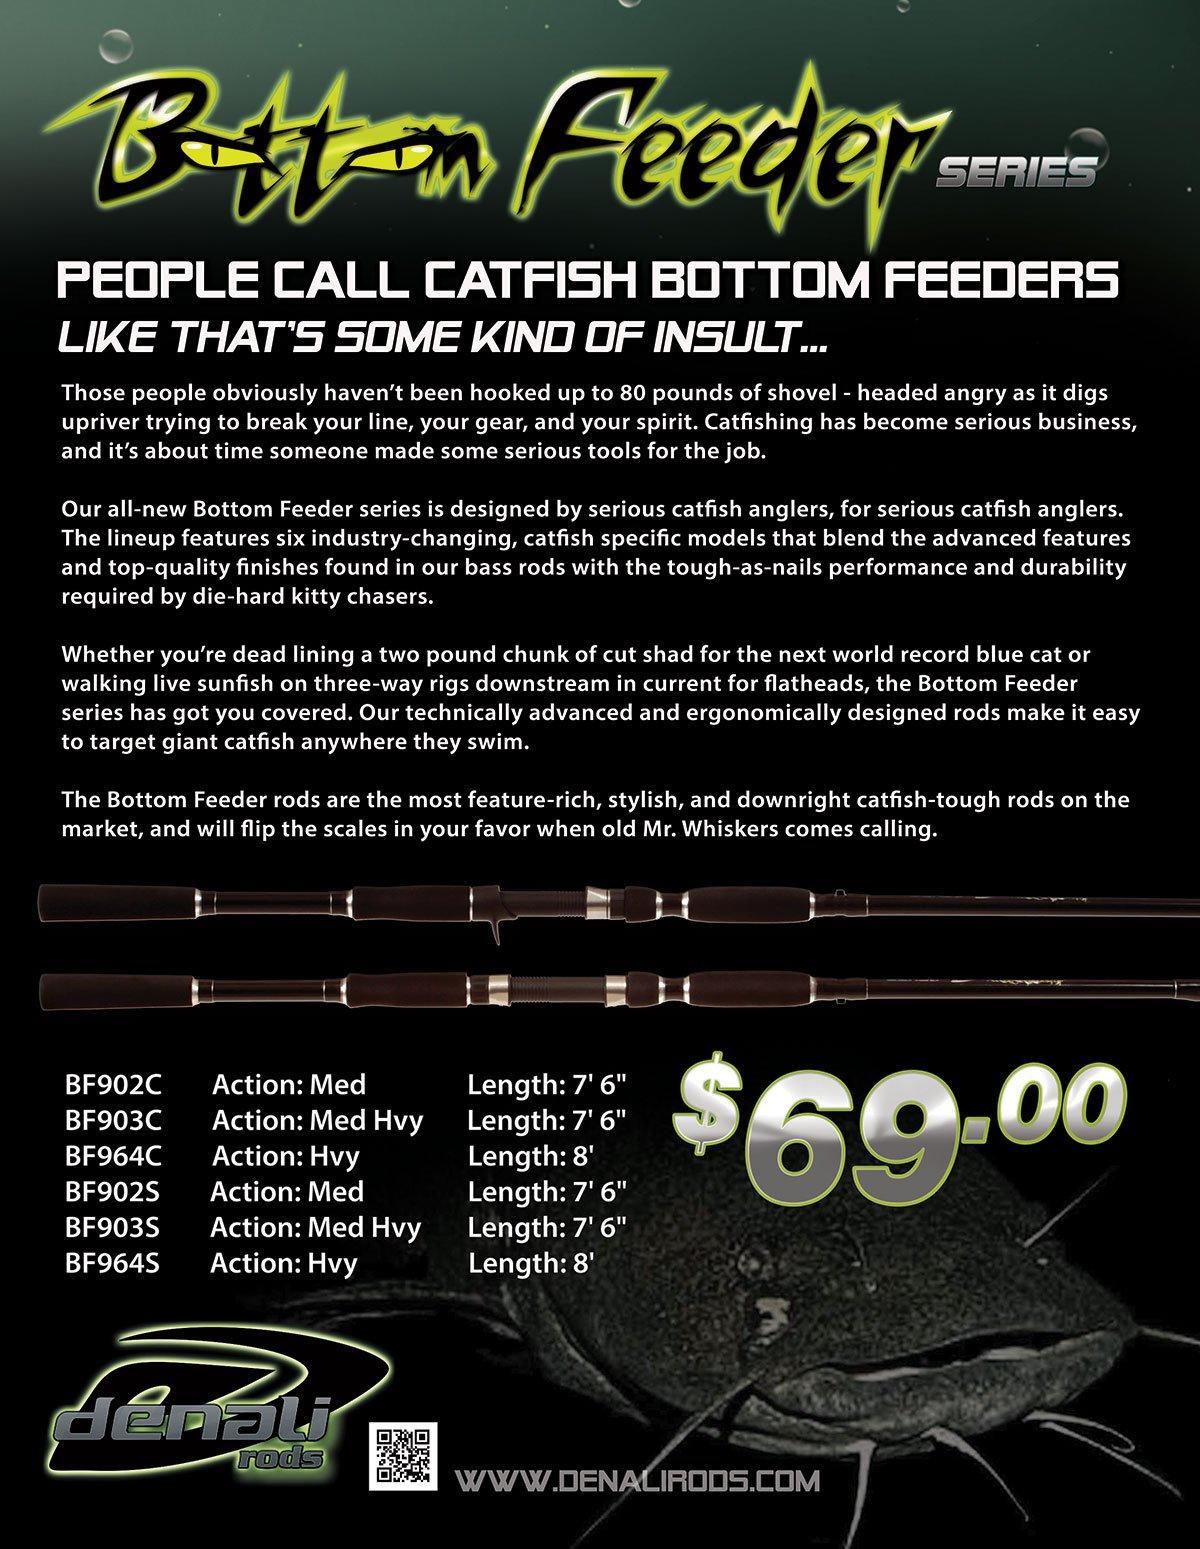 Catfish Series Coming Soon from Denali Rods - Wired2Fish